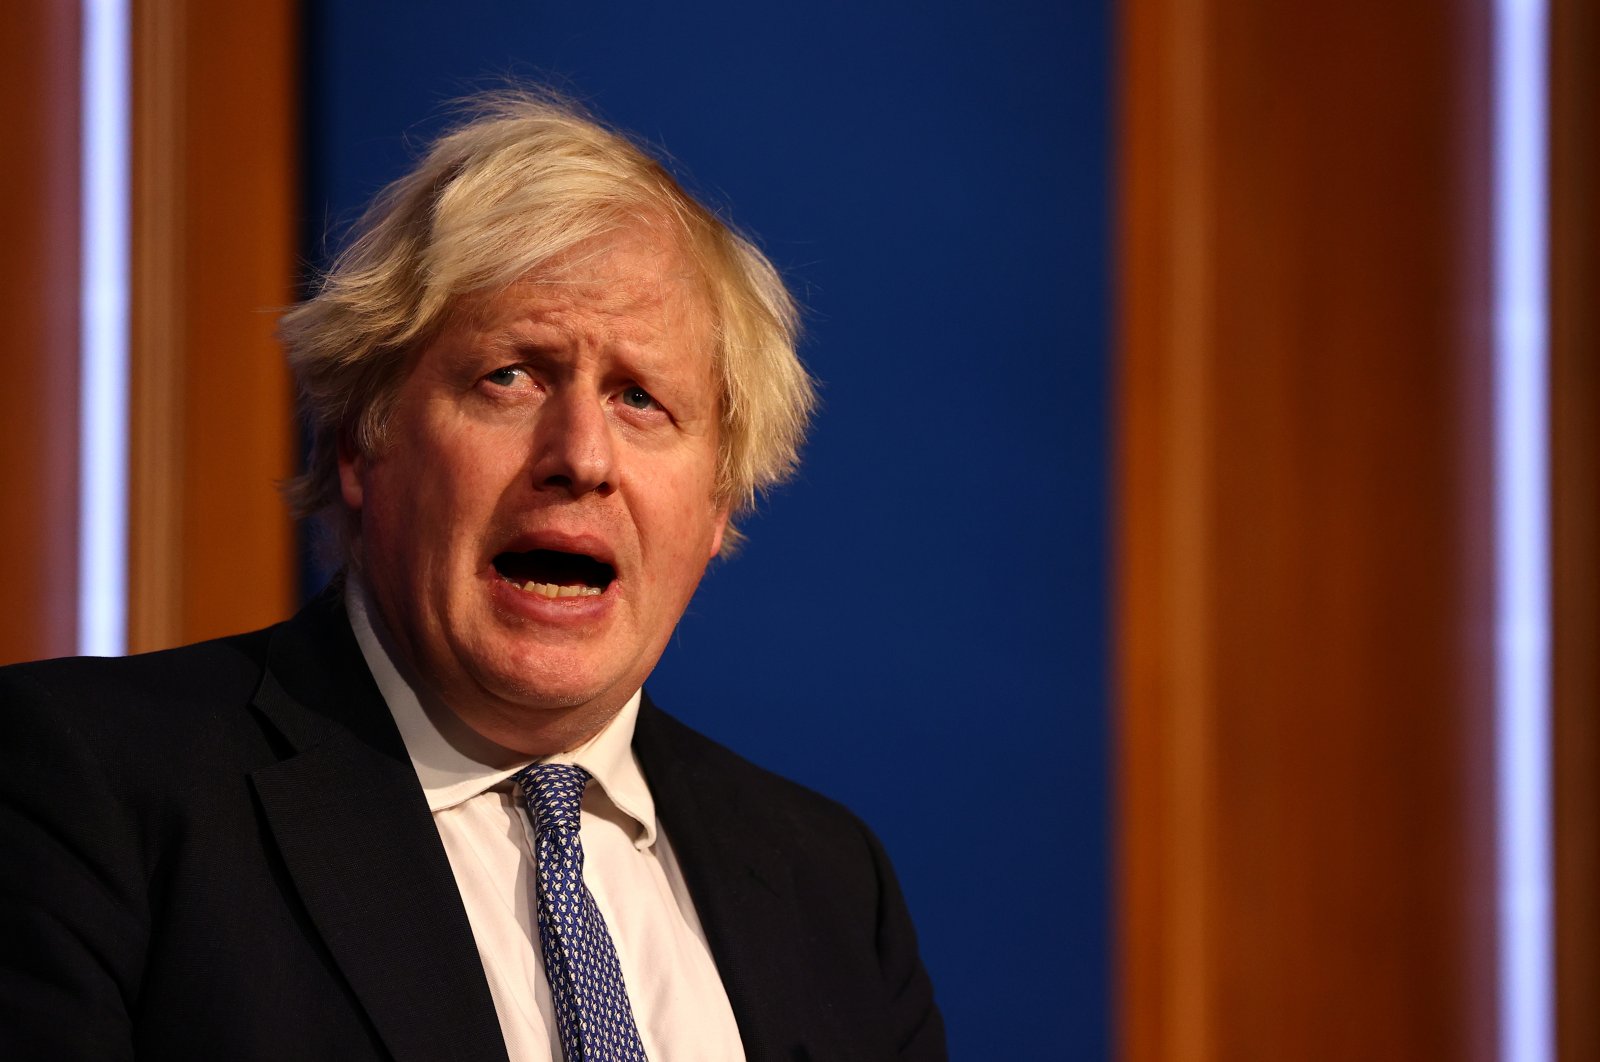 British Prime Minister Boris Johnson holds a news conference for the coronavirus disease update in the Downing Street briefing room in London, Britain, Dec. 8, 2021. (Reuters Photo)